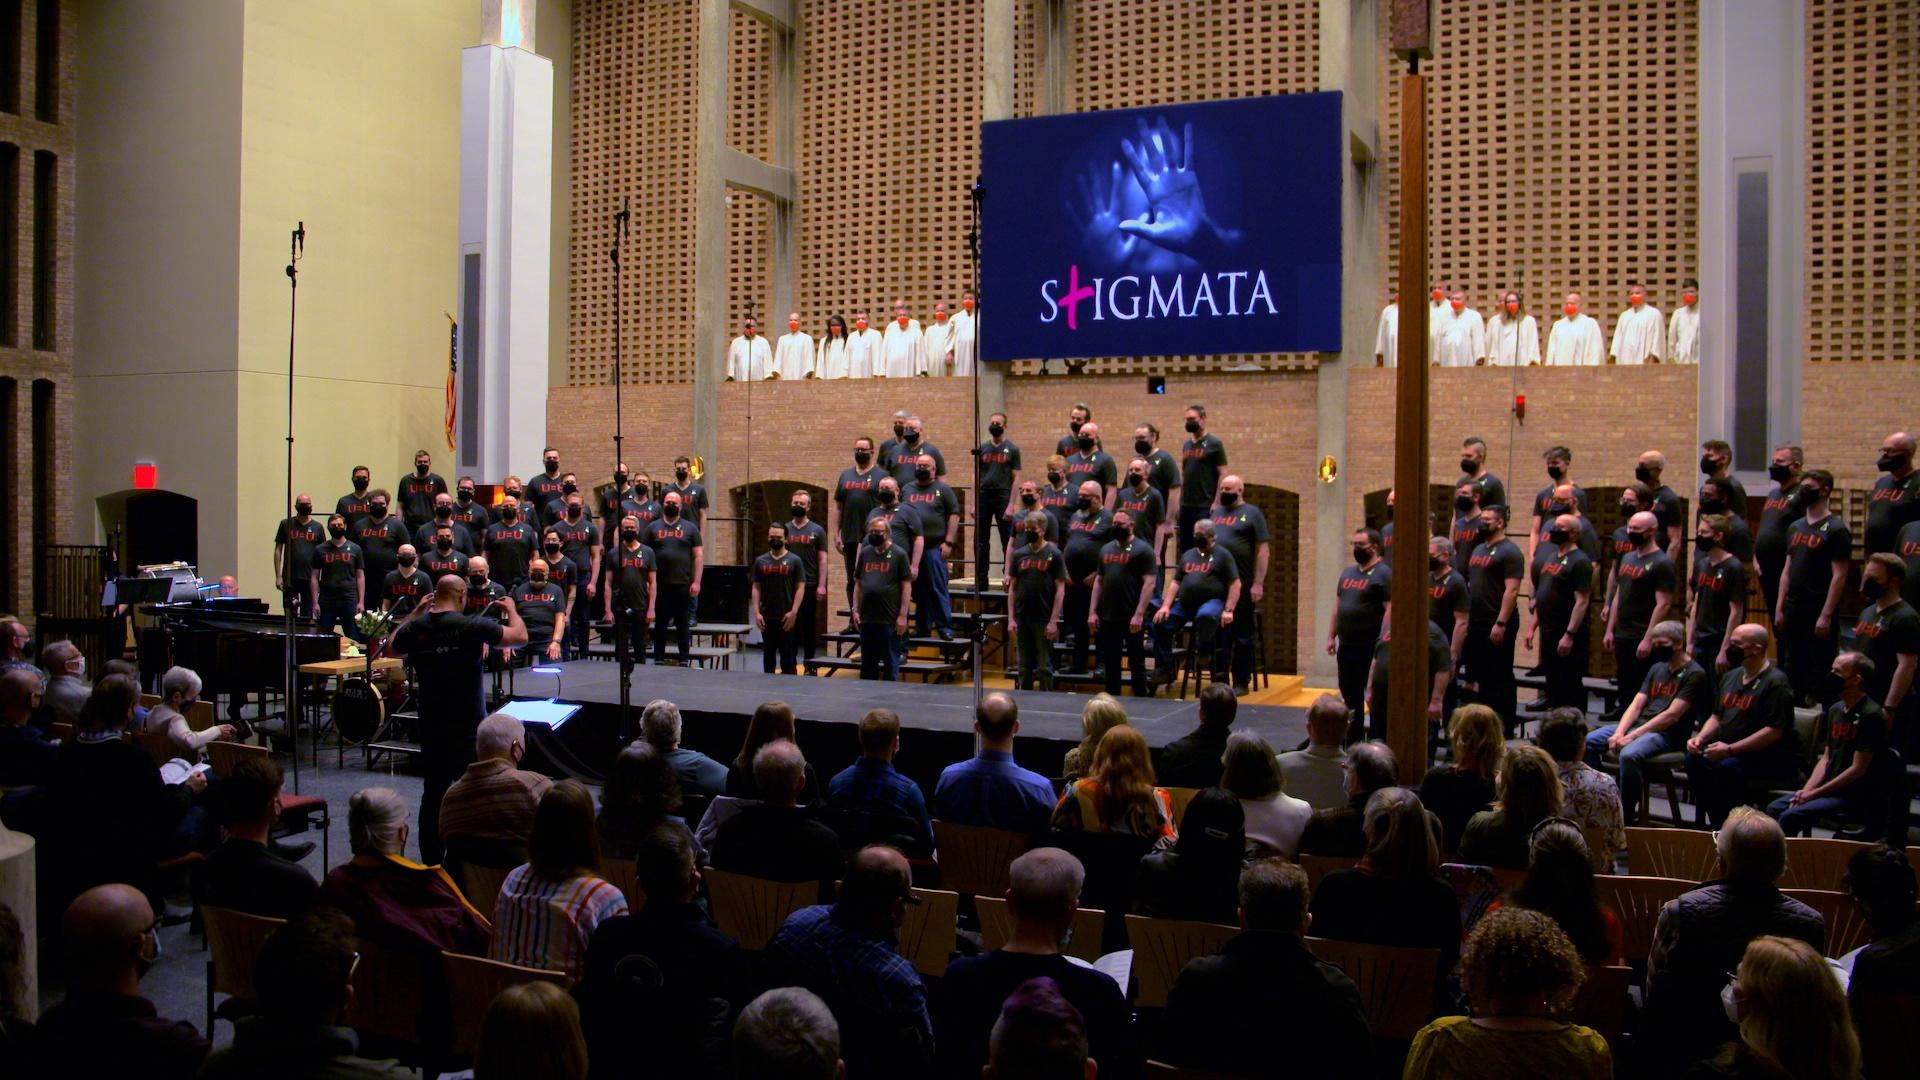 A choir sings on a stage in front of an audience.